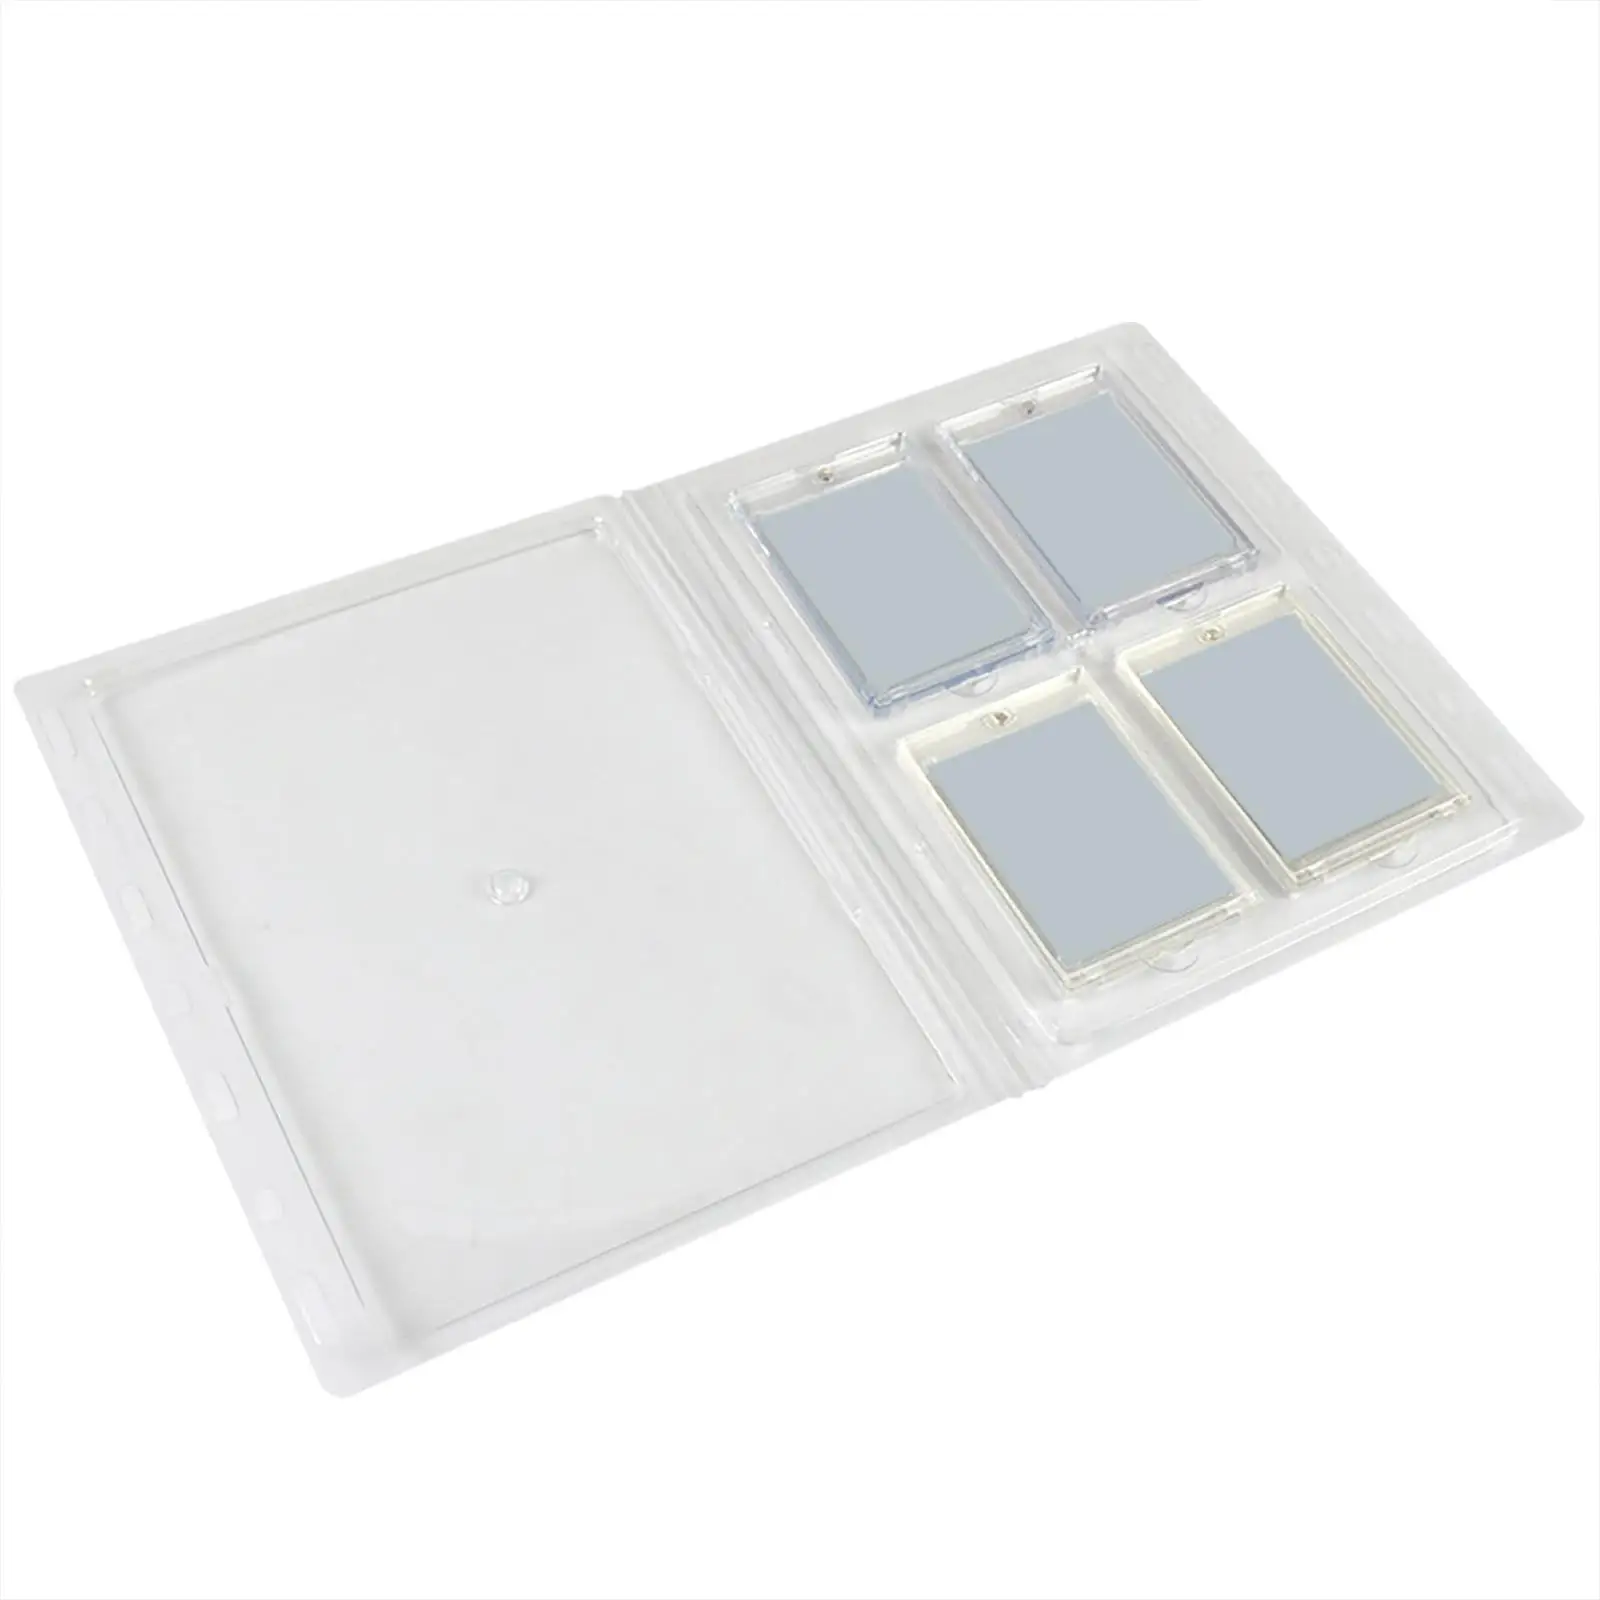 Transparent Album Cards Holder Protective Sleeves for Board Games Card